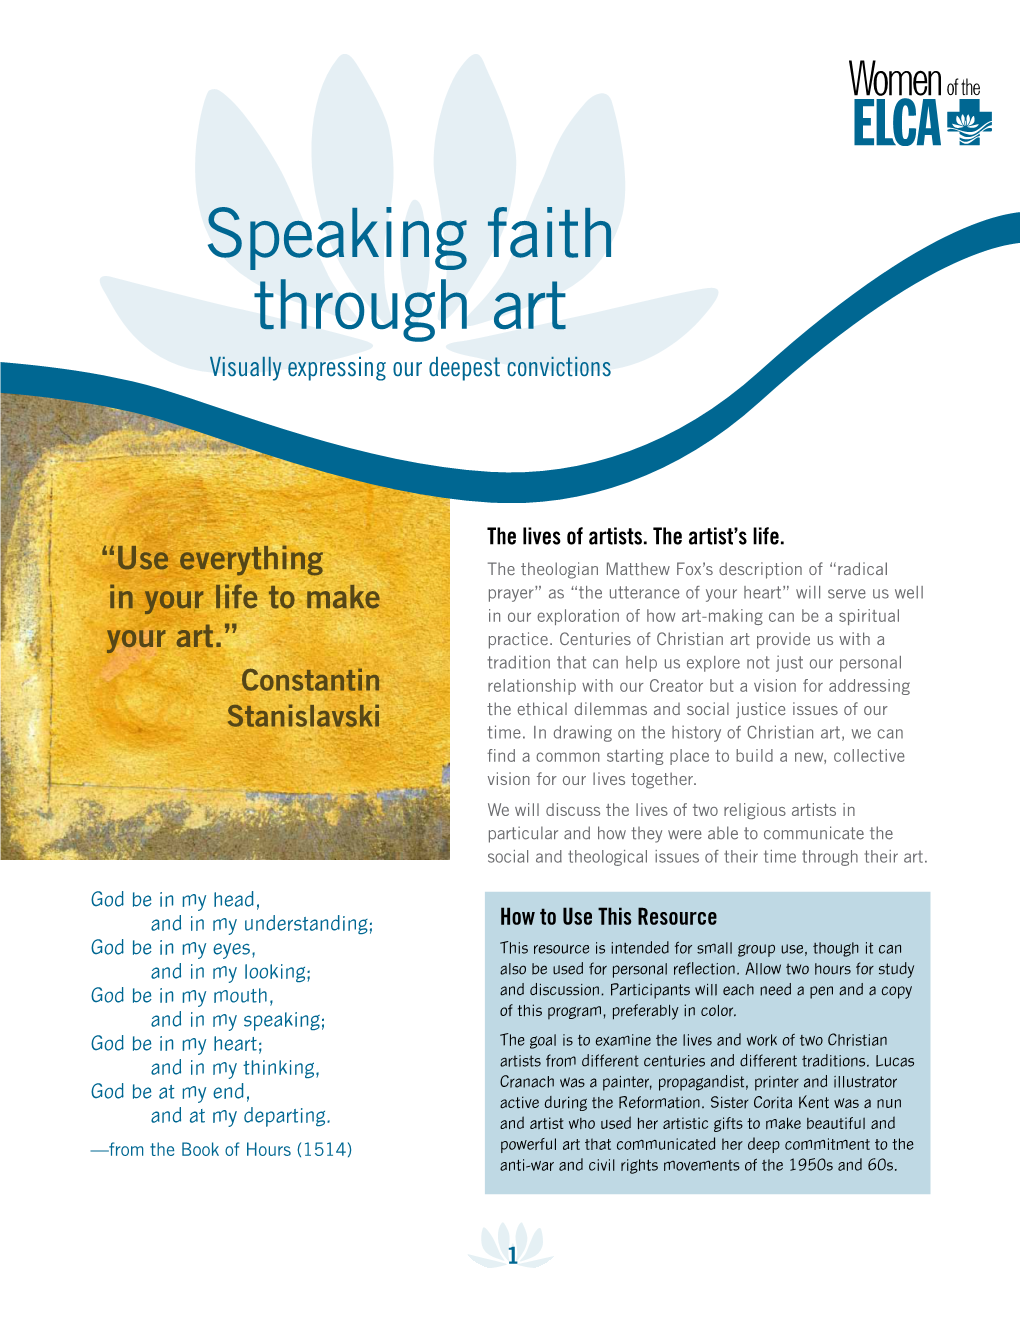 Speaking Faith Through Art Visually Expressing Our Deepest Convictions